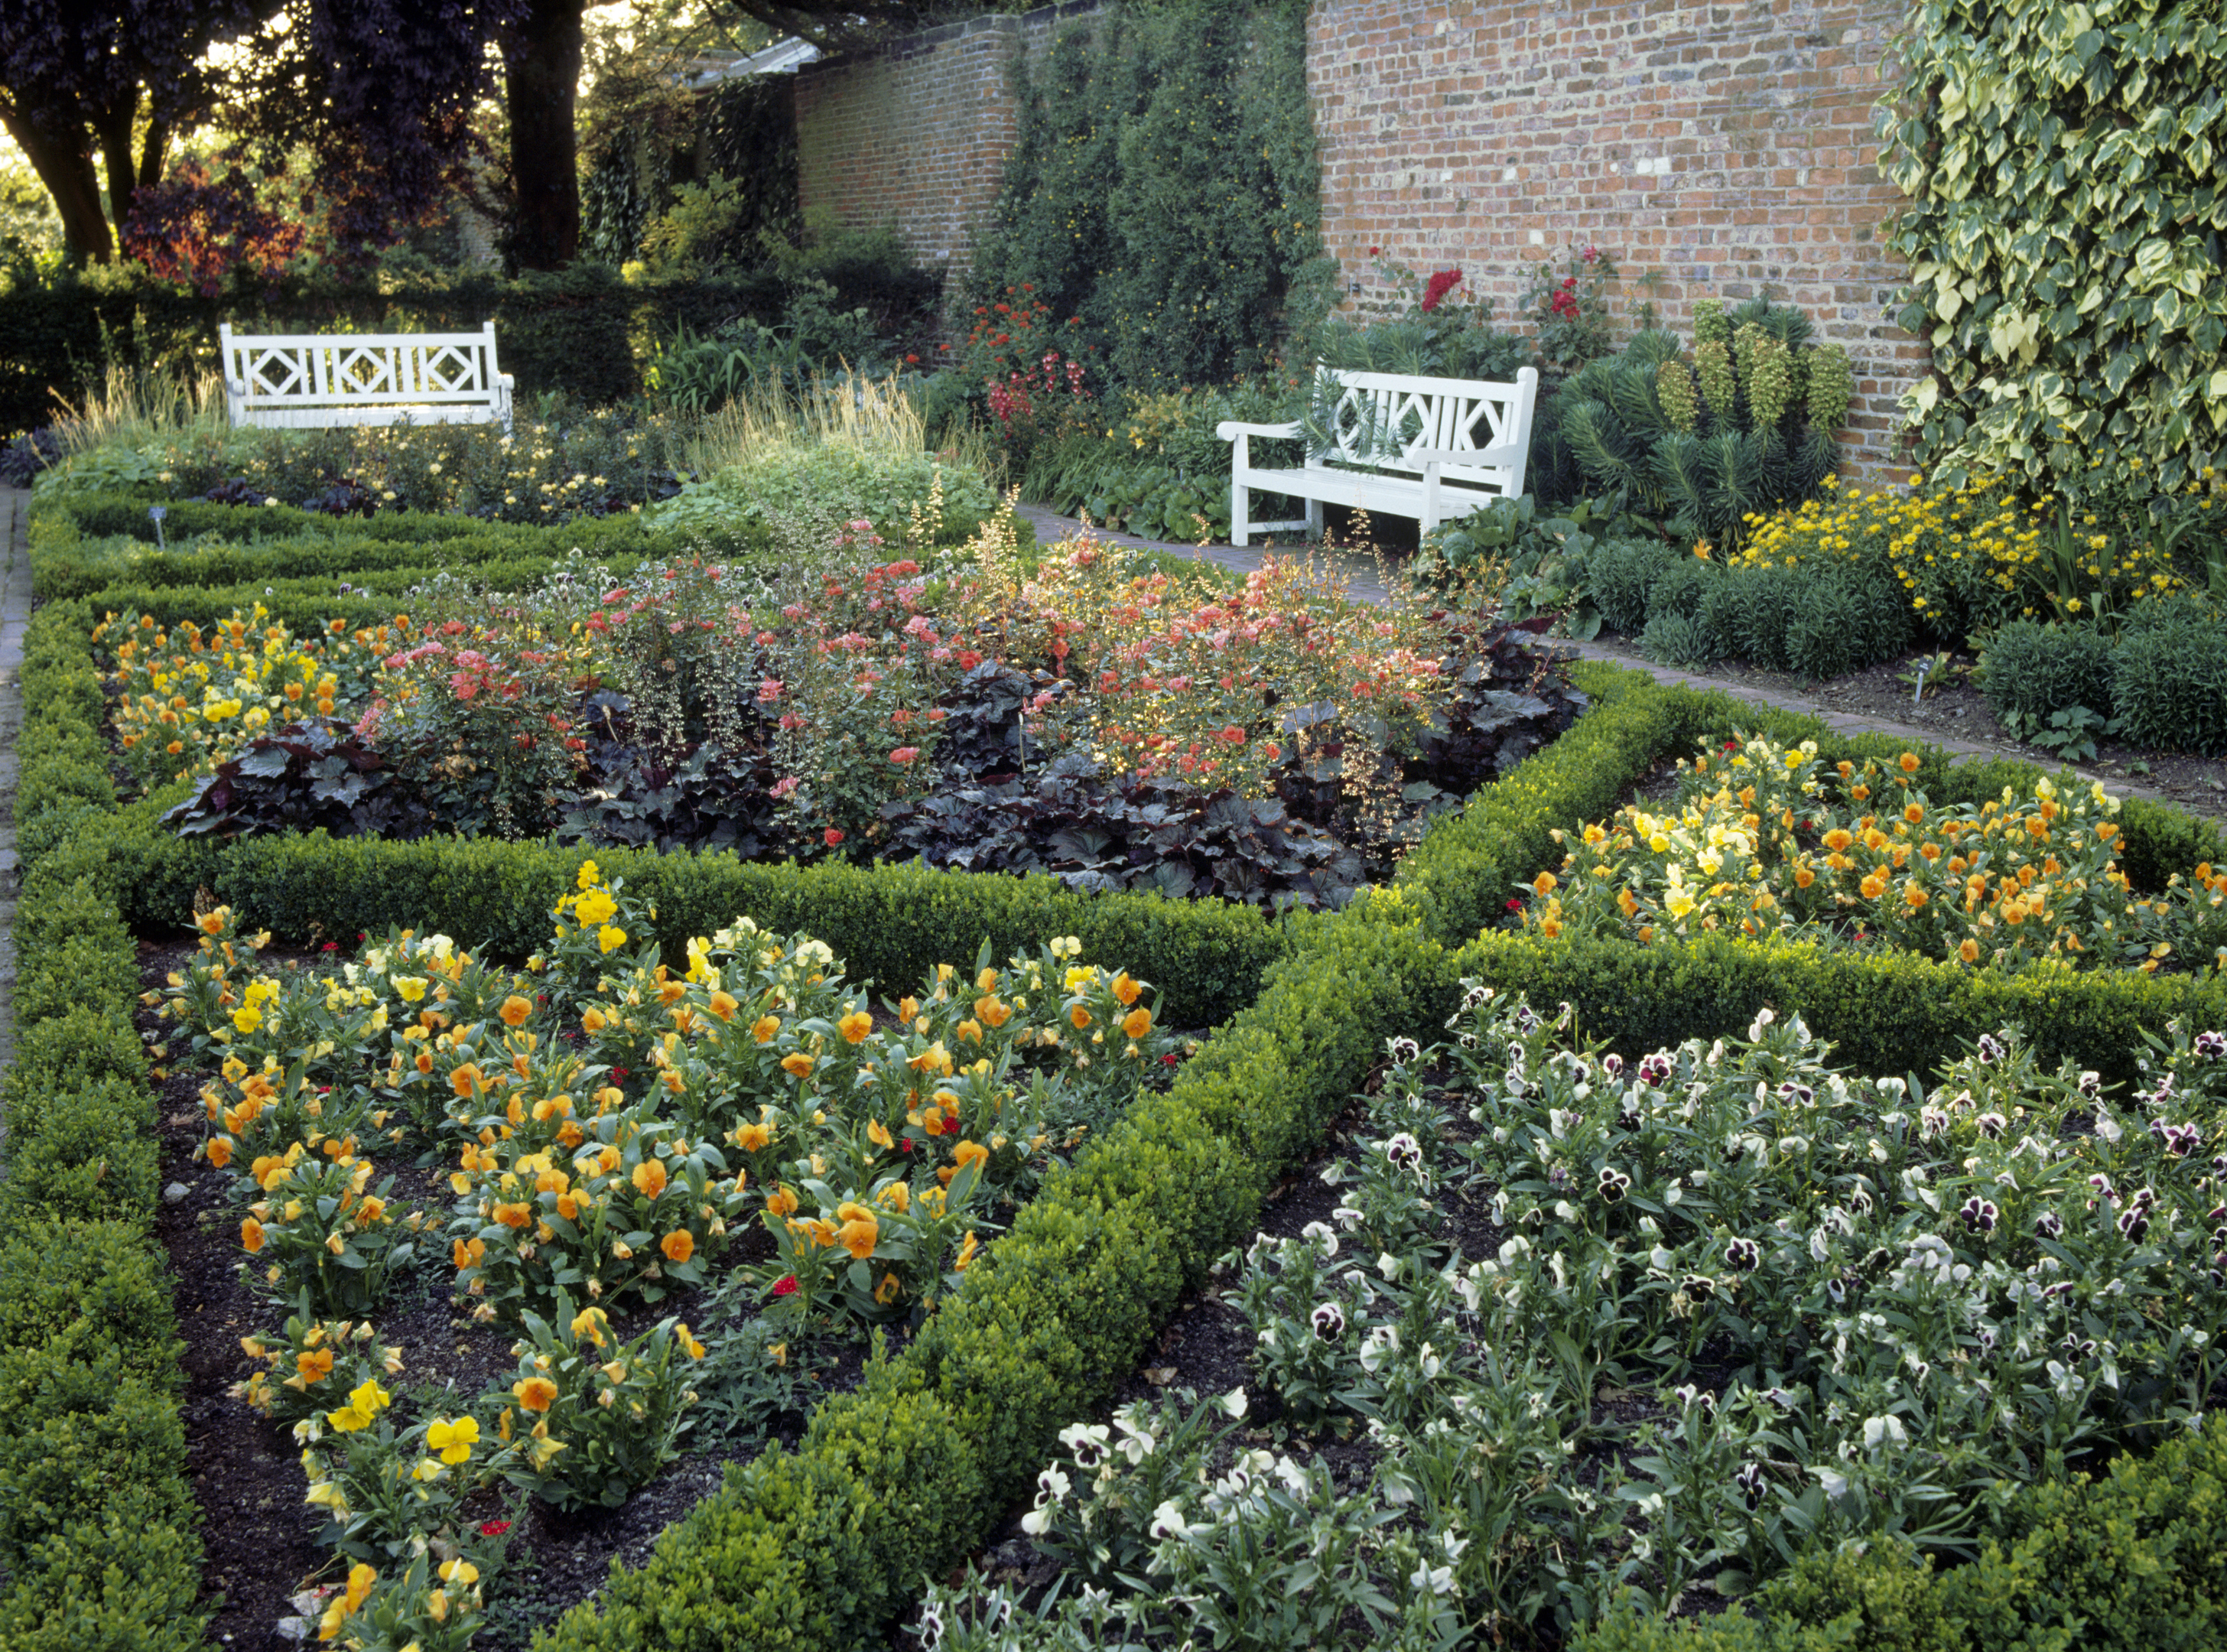 View of the Parterre in the west Formal Garden at Beningbrough Hall. The garden was redesigned in the style of a 16th century knot garden with low-growing plants between dwarf box hedges (Ian Shaw/National Trust Images/PA)